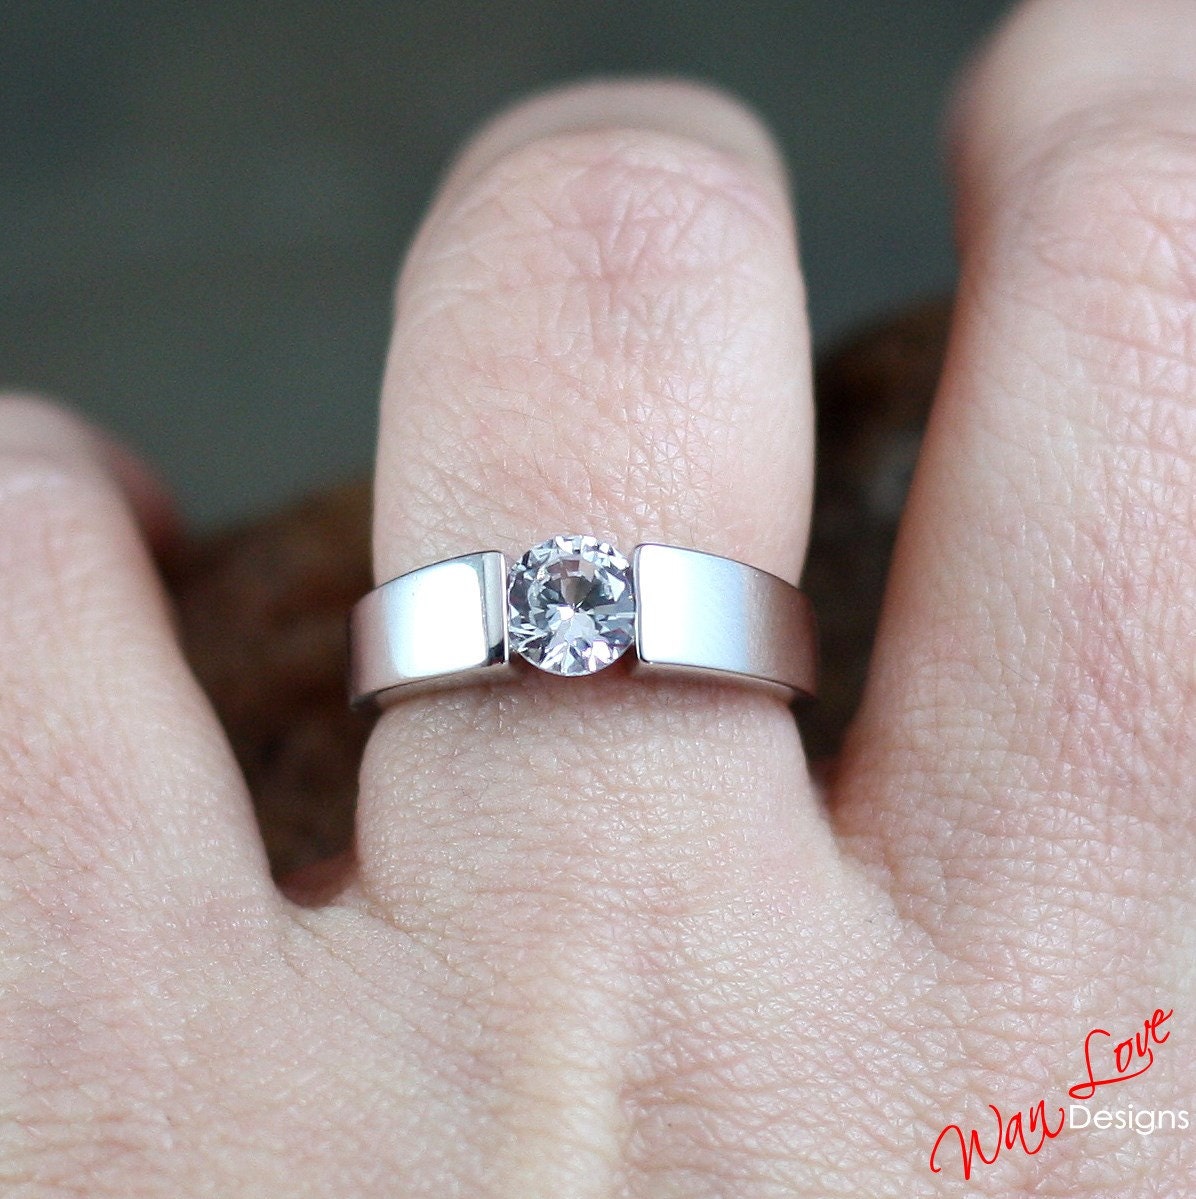 Sample Sale Ready to ship-White Sapphire Channel Tension set Engagement Ring, Solitaire, Thick band, 1ct, 6mm, Silver Rhodium Wan Love Designs